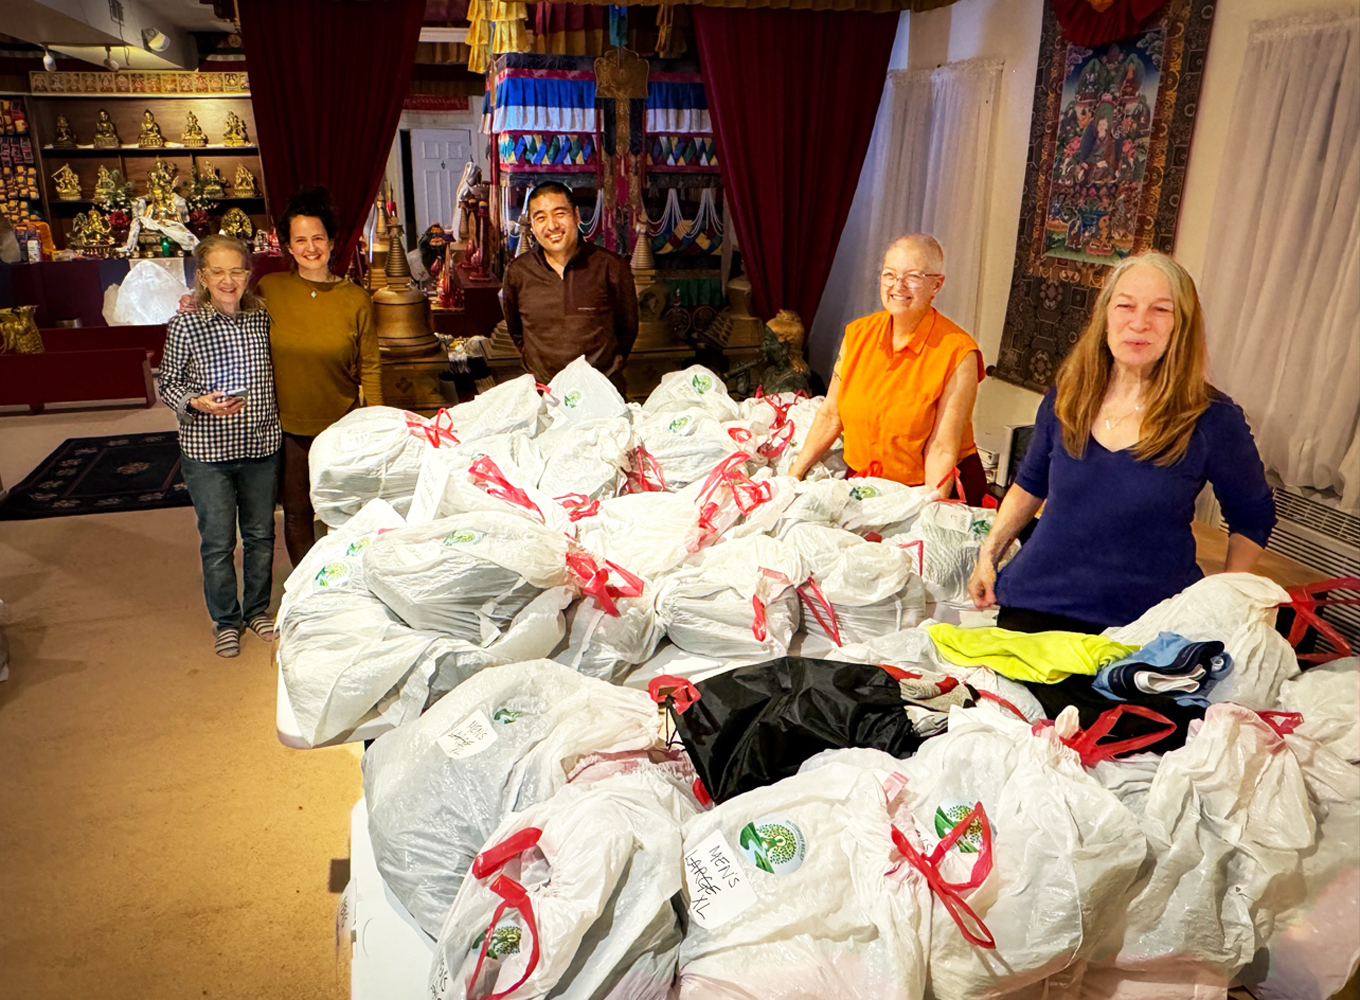 KTK with Buddhist Relief bagging clothing